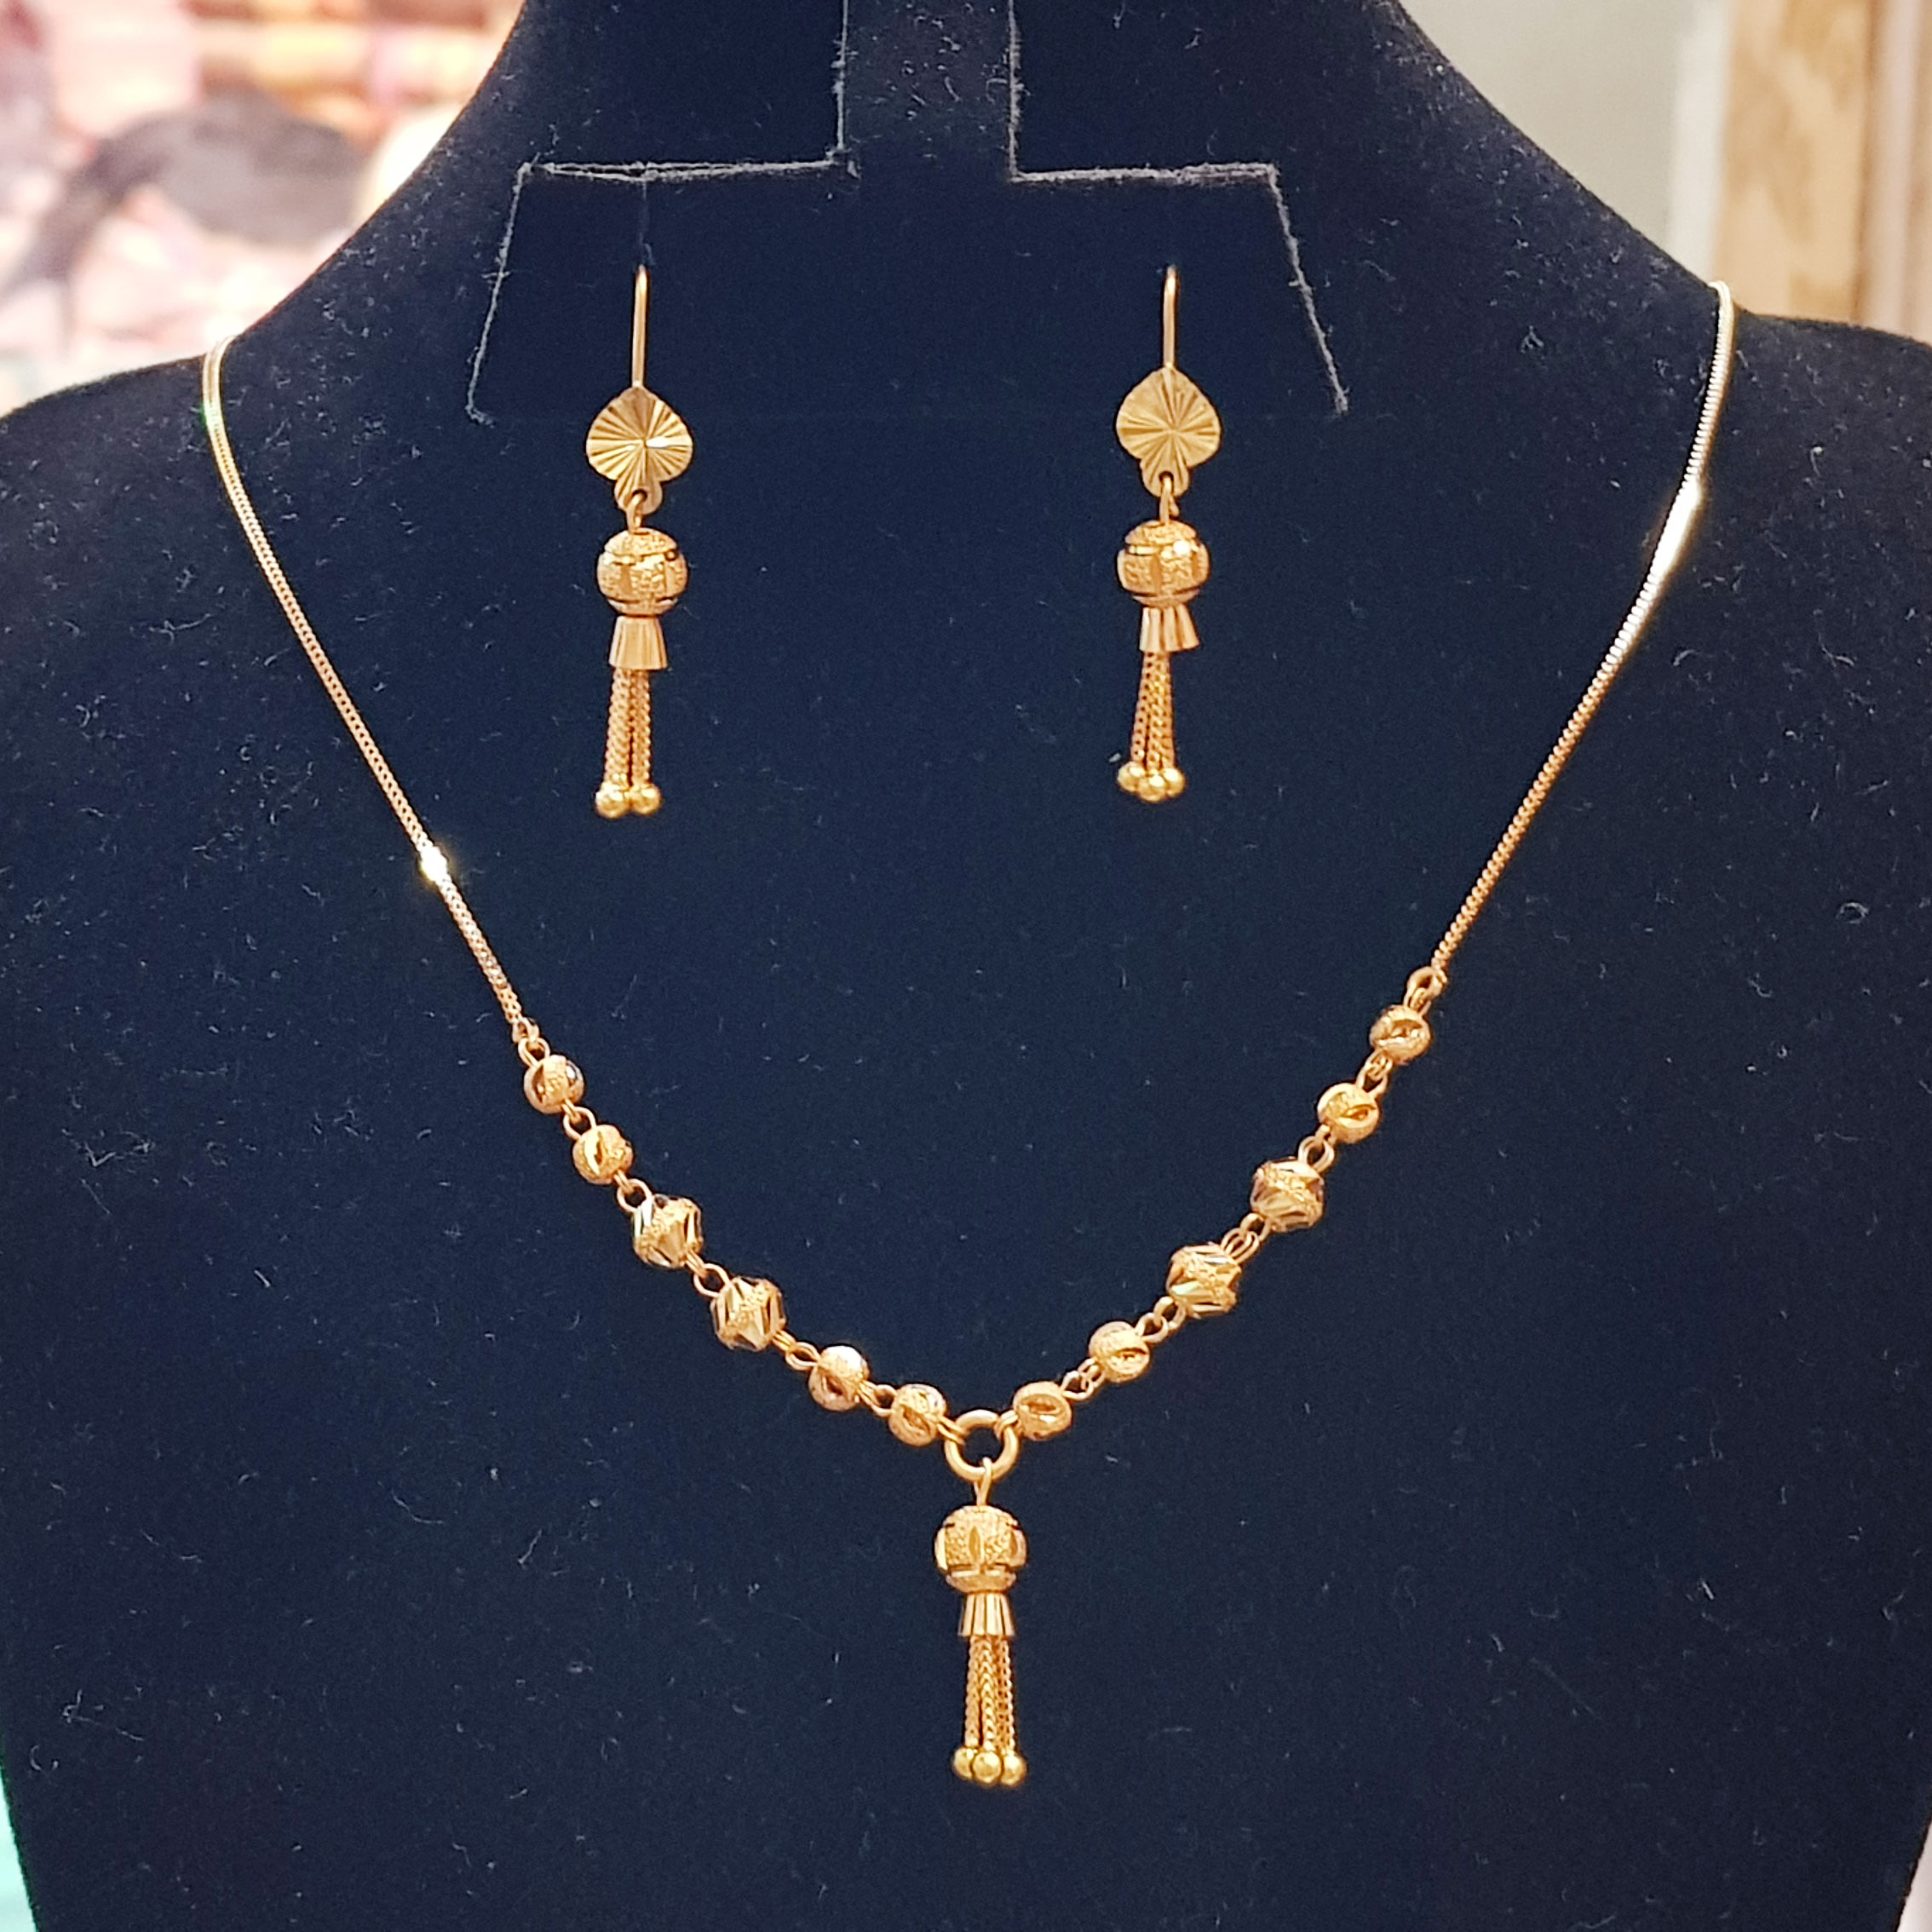 Newest Ladies Gold Necklace Set with Ball Design